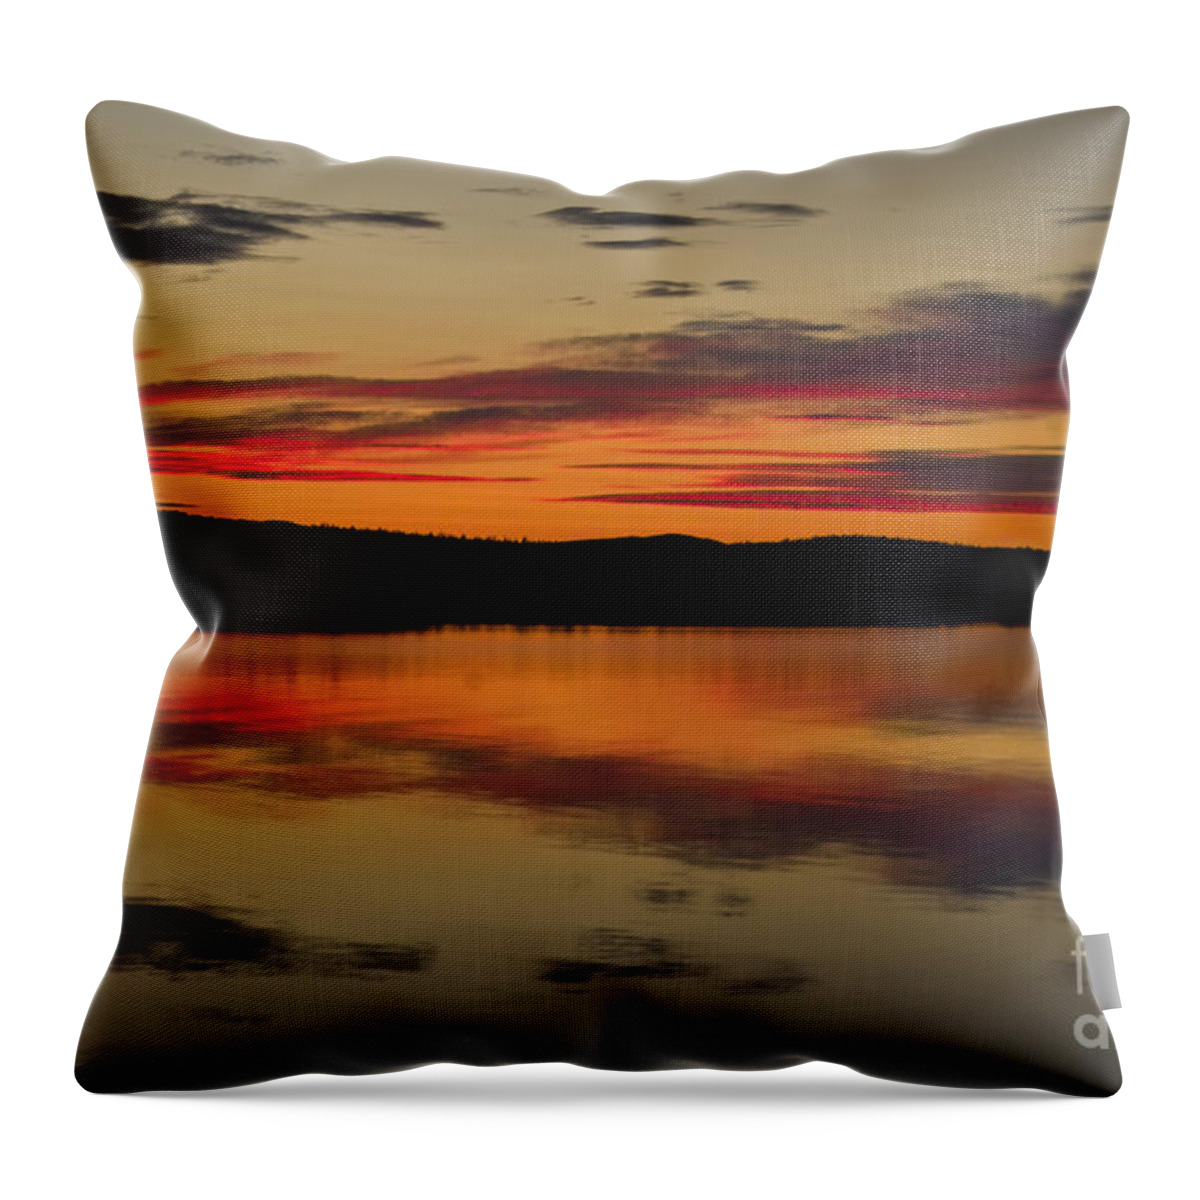 Water Throw Pillow featuring the photograph Evening Sky by Heiko Koehrer-Wagner